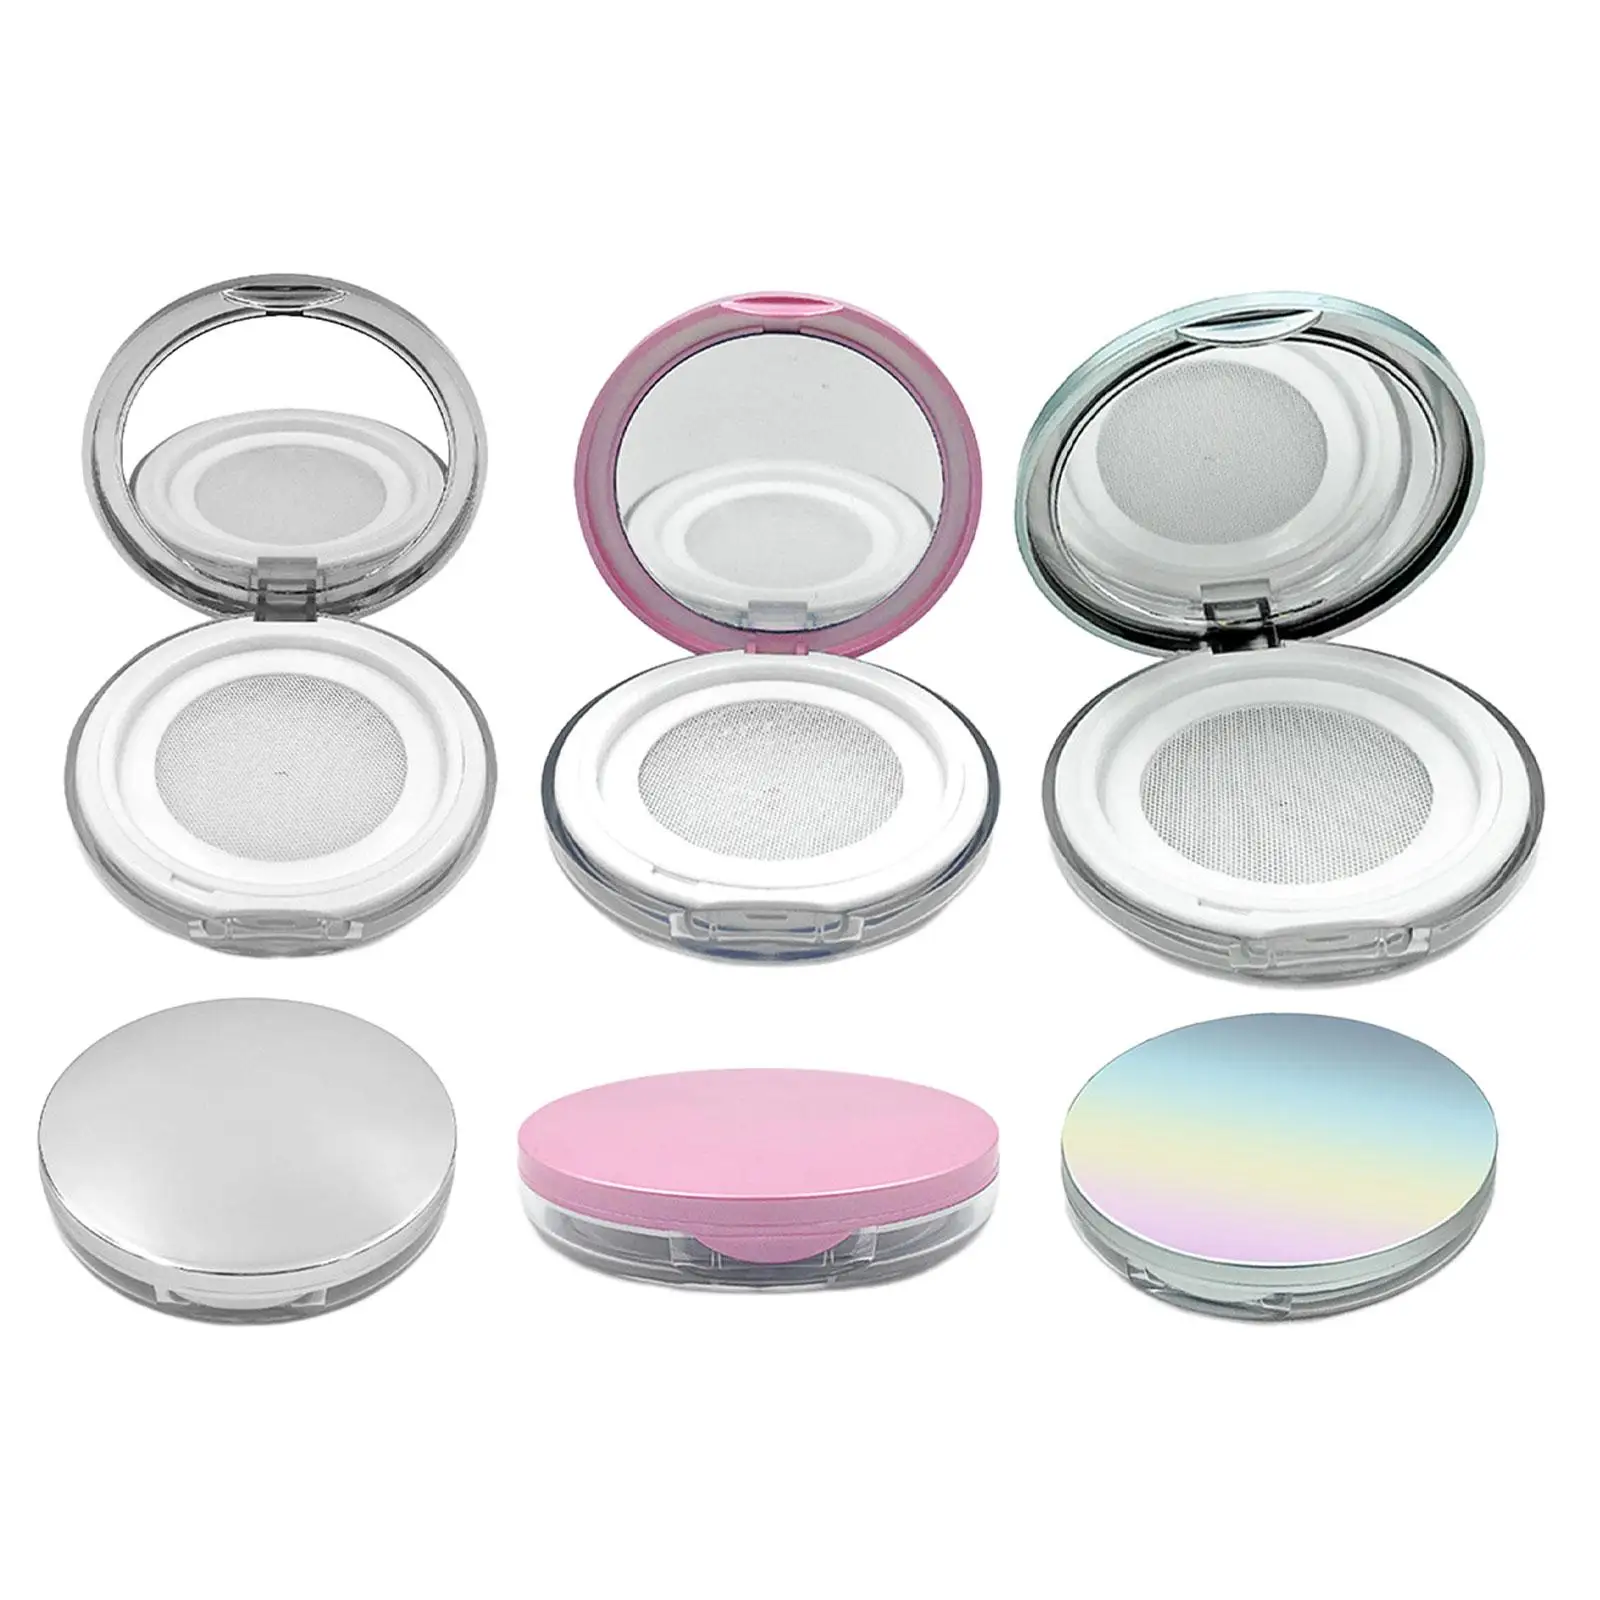 2 Pieces Makeup Loose Powder Case Container 3G Holder Accessories Mesh Screen to Keep The Powder in Place 3inchx0.6inch DIY